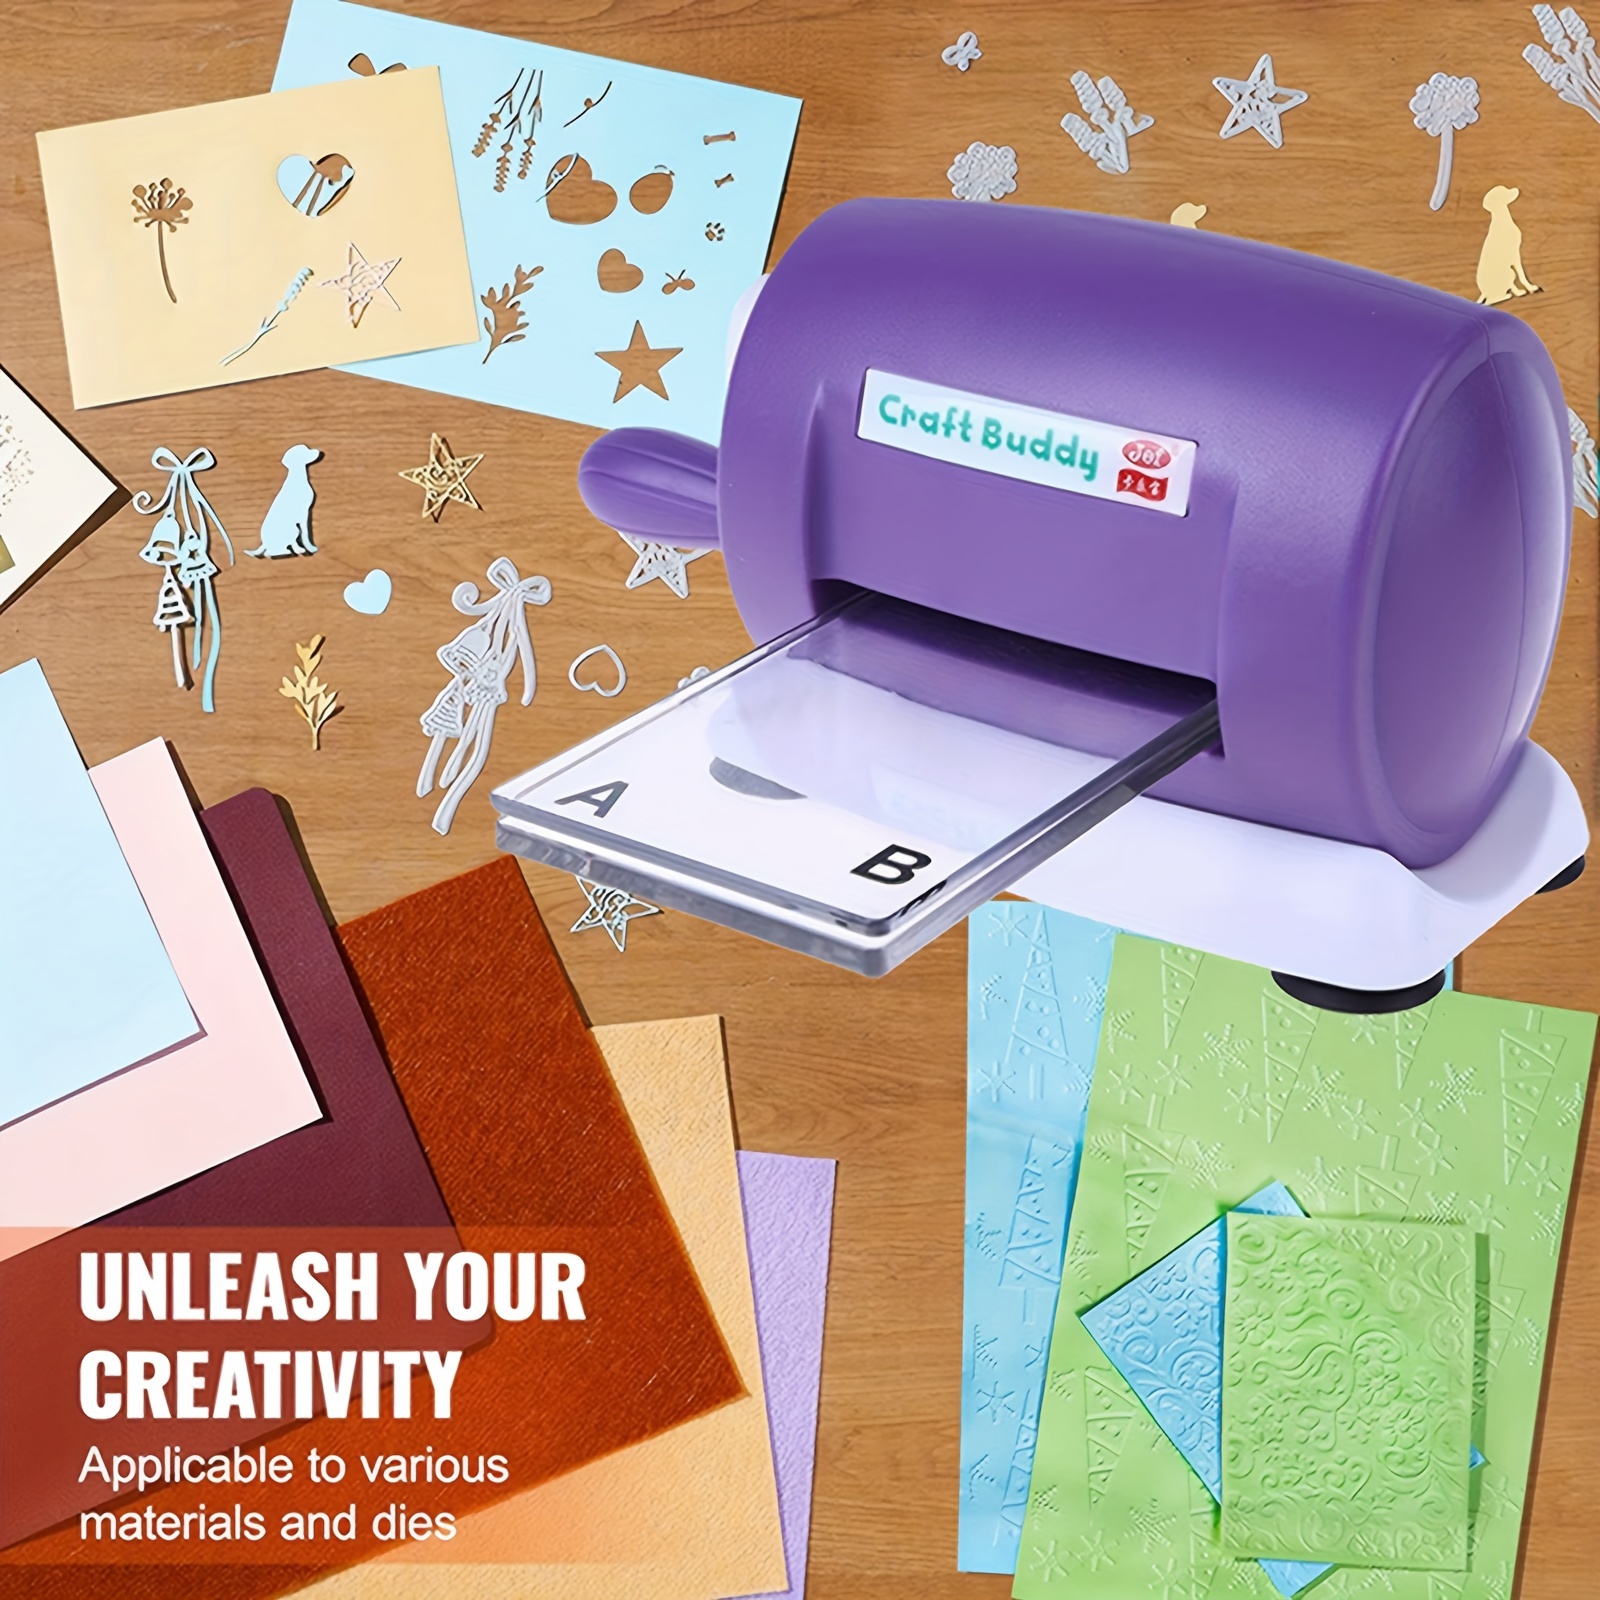 

Craft Buddy Mixed Color Manual Embossing Machine Jf-838s - No Electricity Or Battery Required